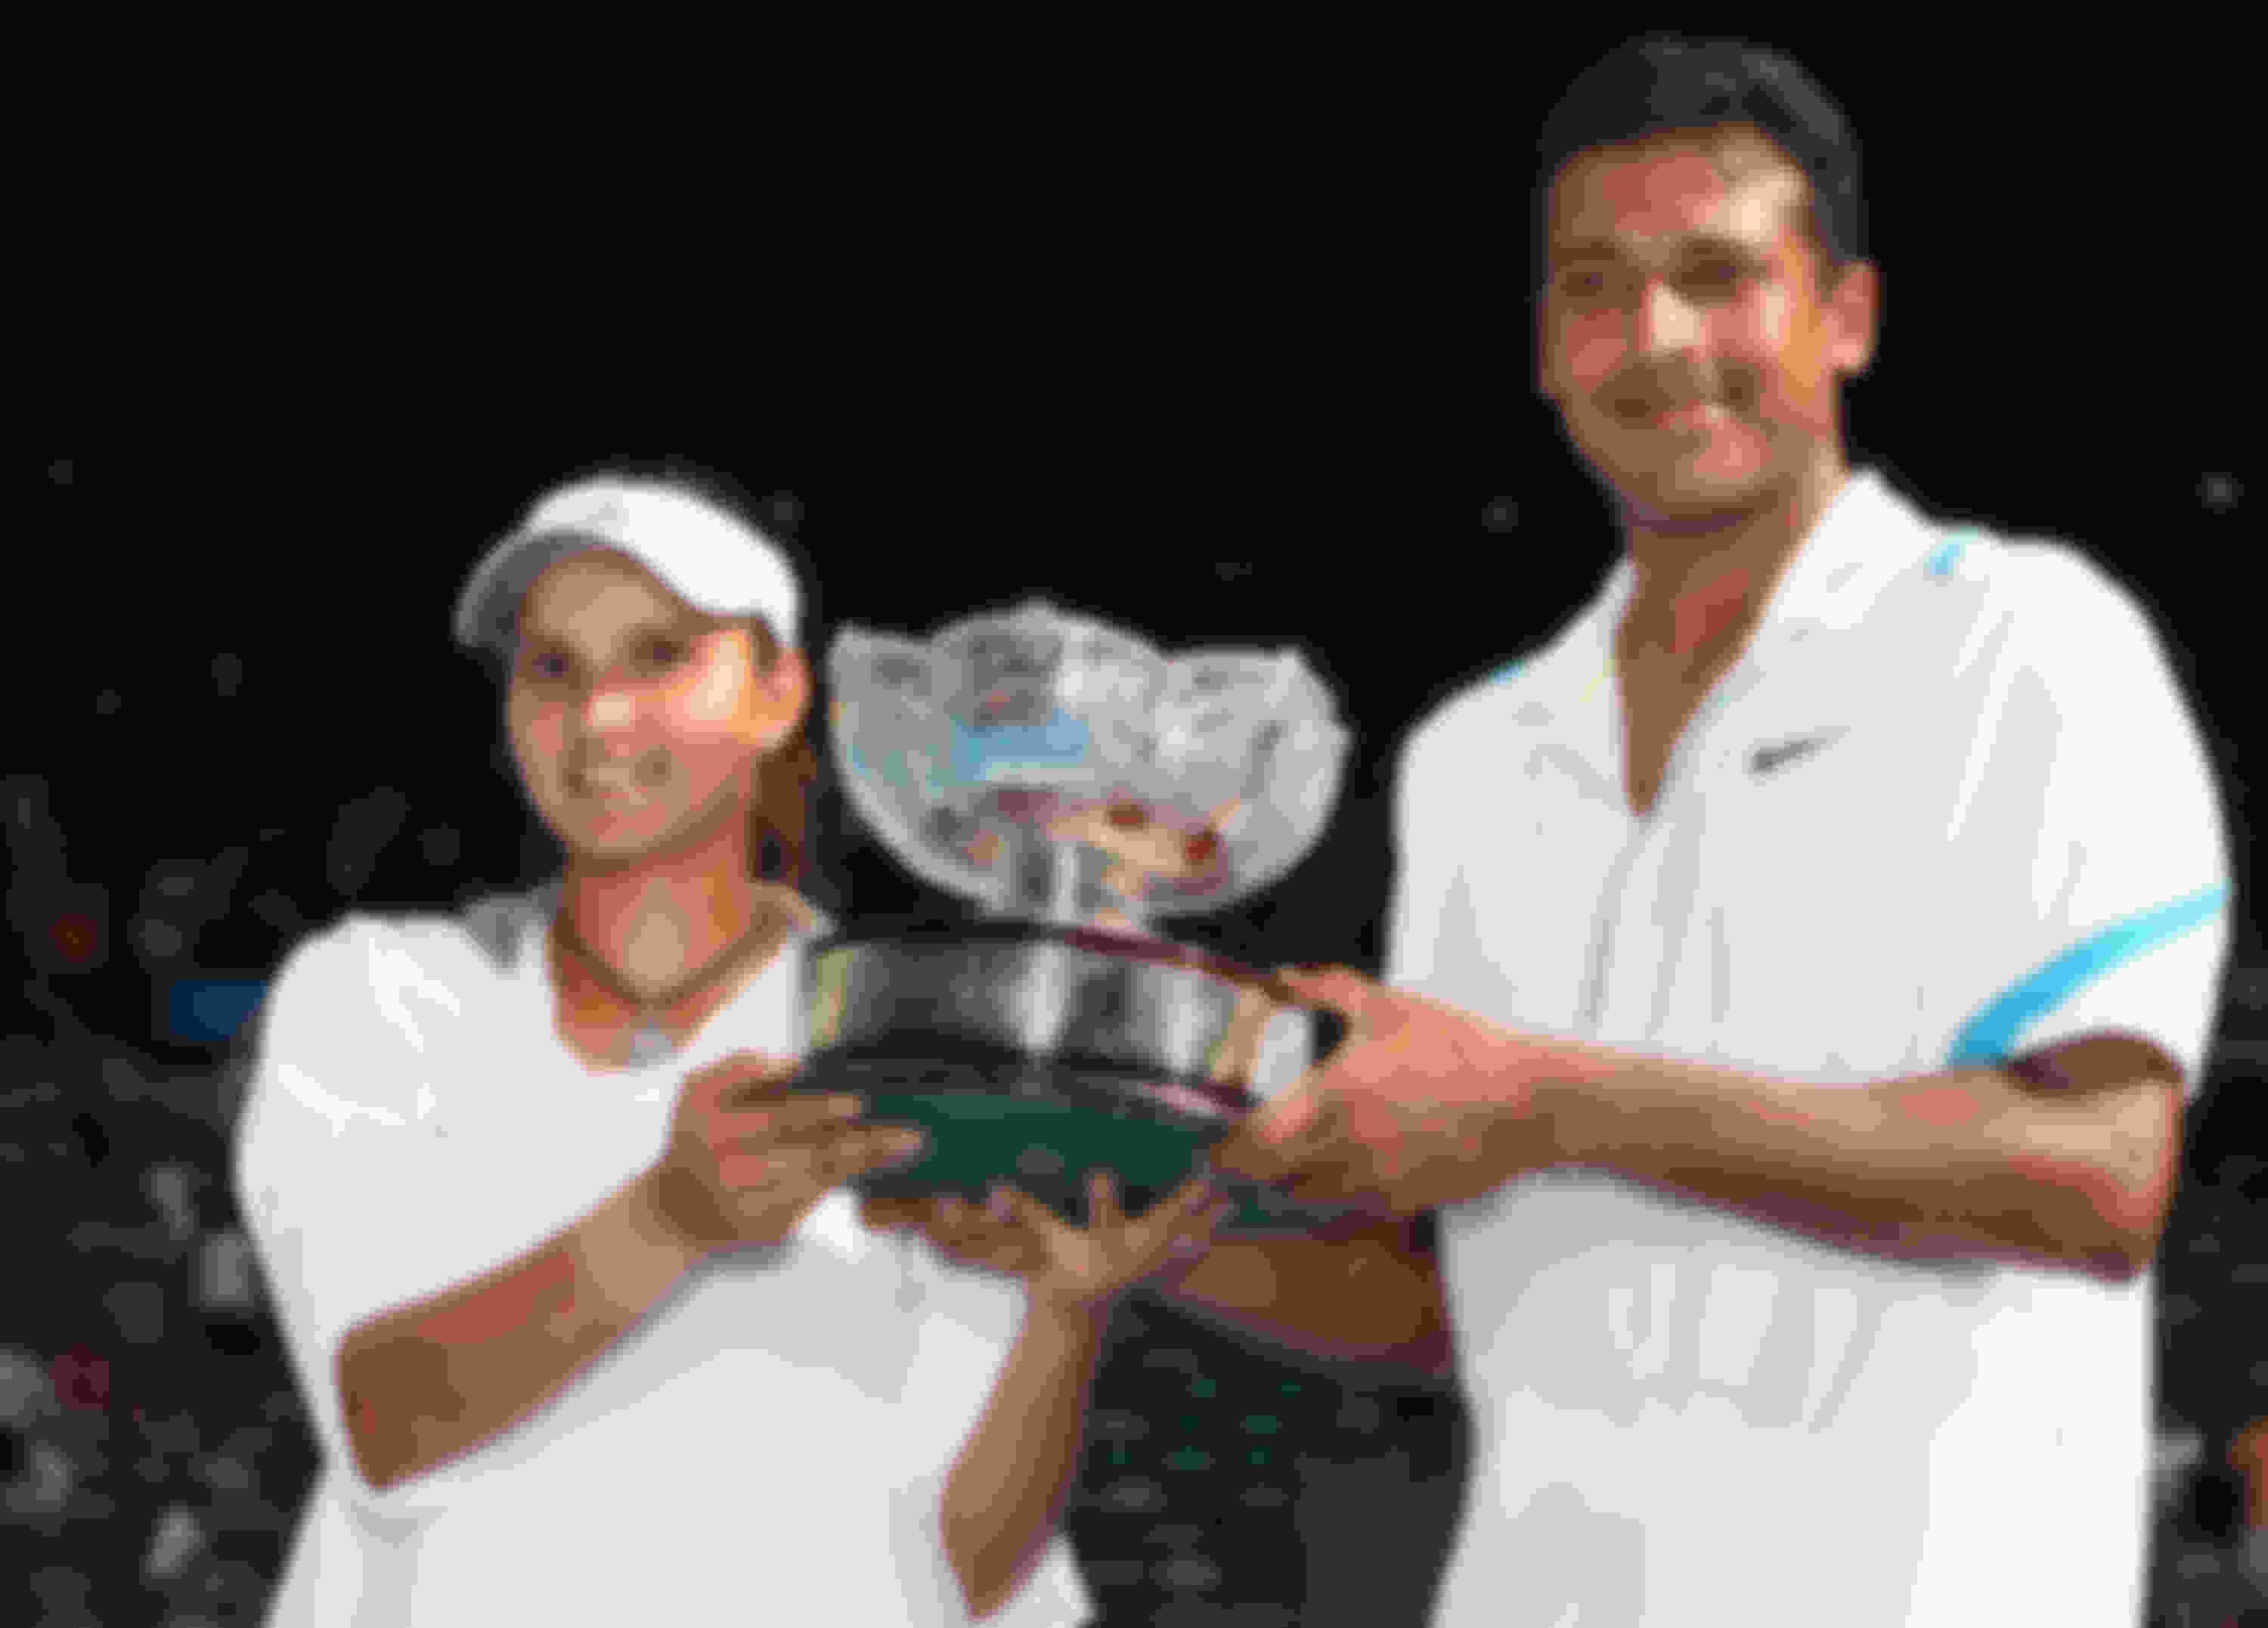 Sania Mirza and Mahesh Bhupathi won the 2009 Australian Open mixed doubles title without dropping a set